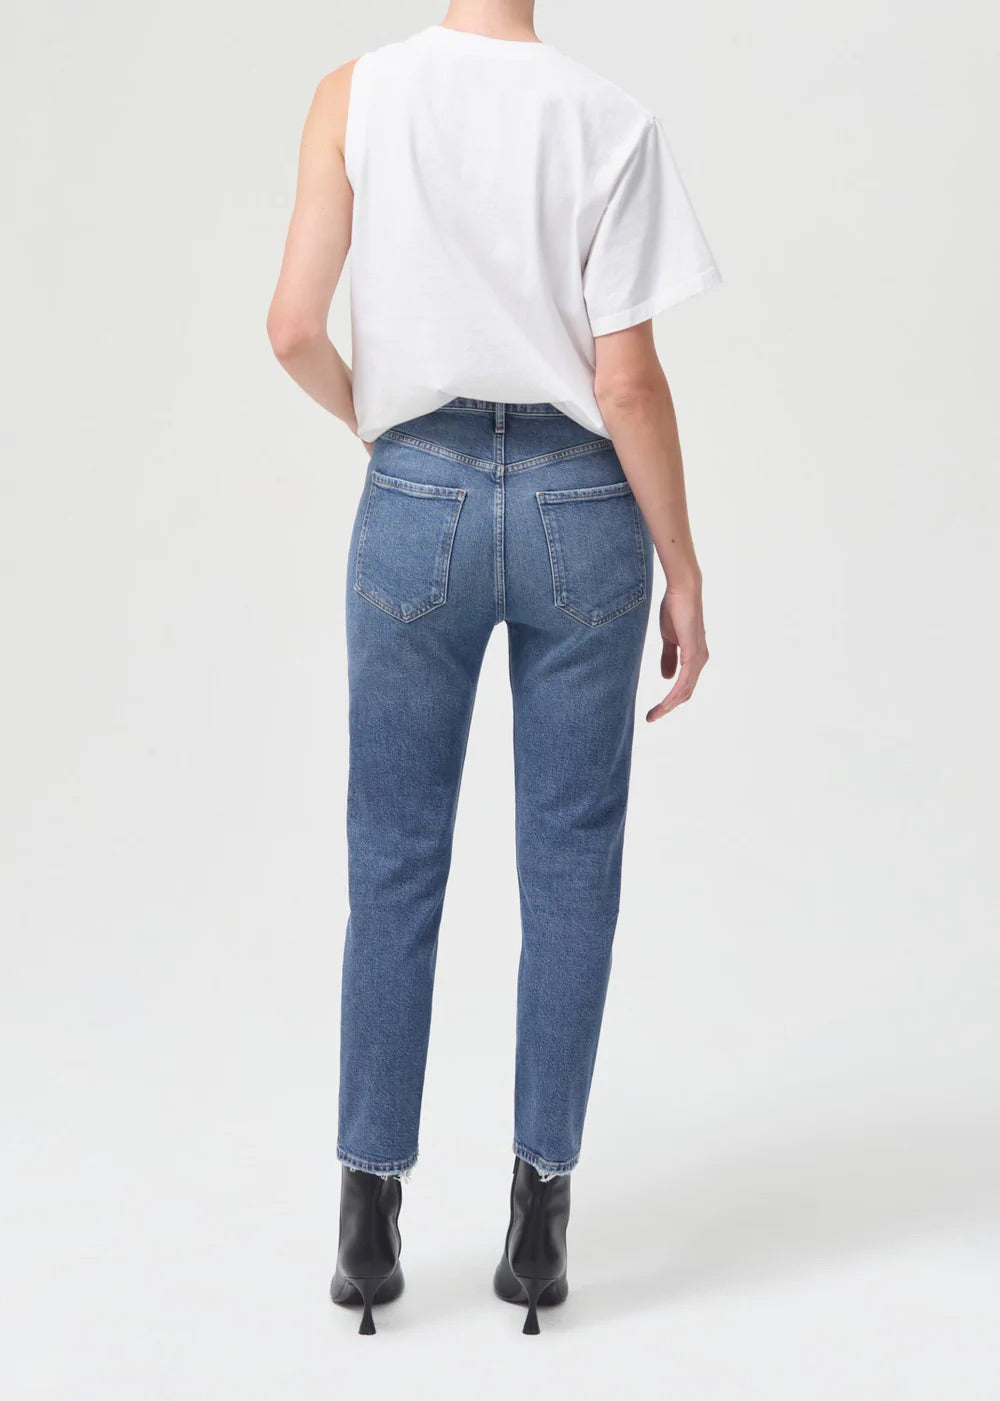 The back view of a woman wearing a white t-shirt and high-rise jeans, including the Riley Straight Crop - Silence by AGOLDE.